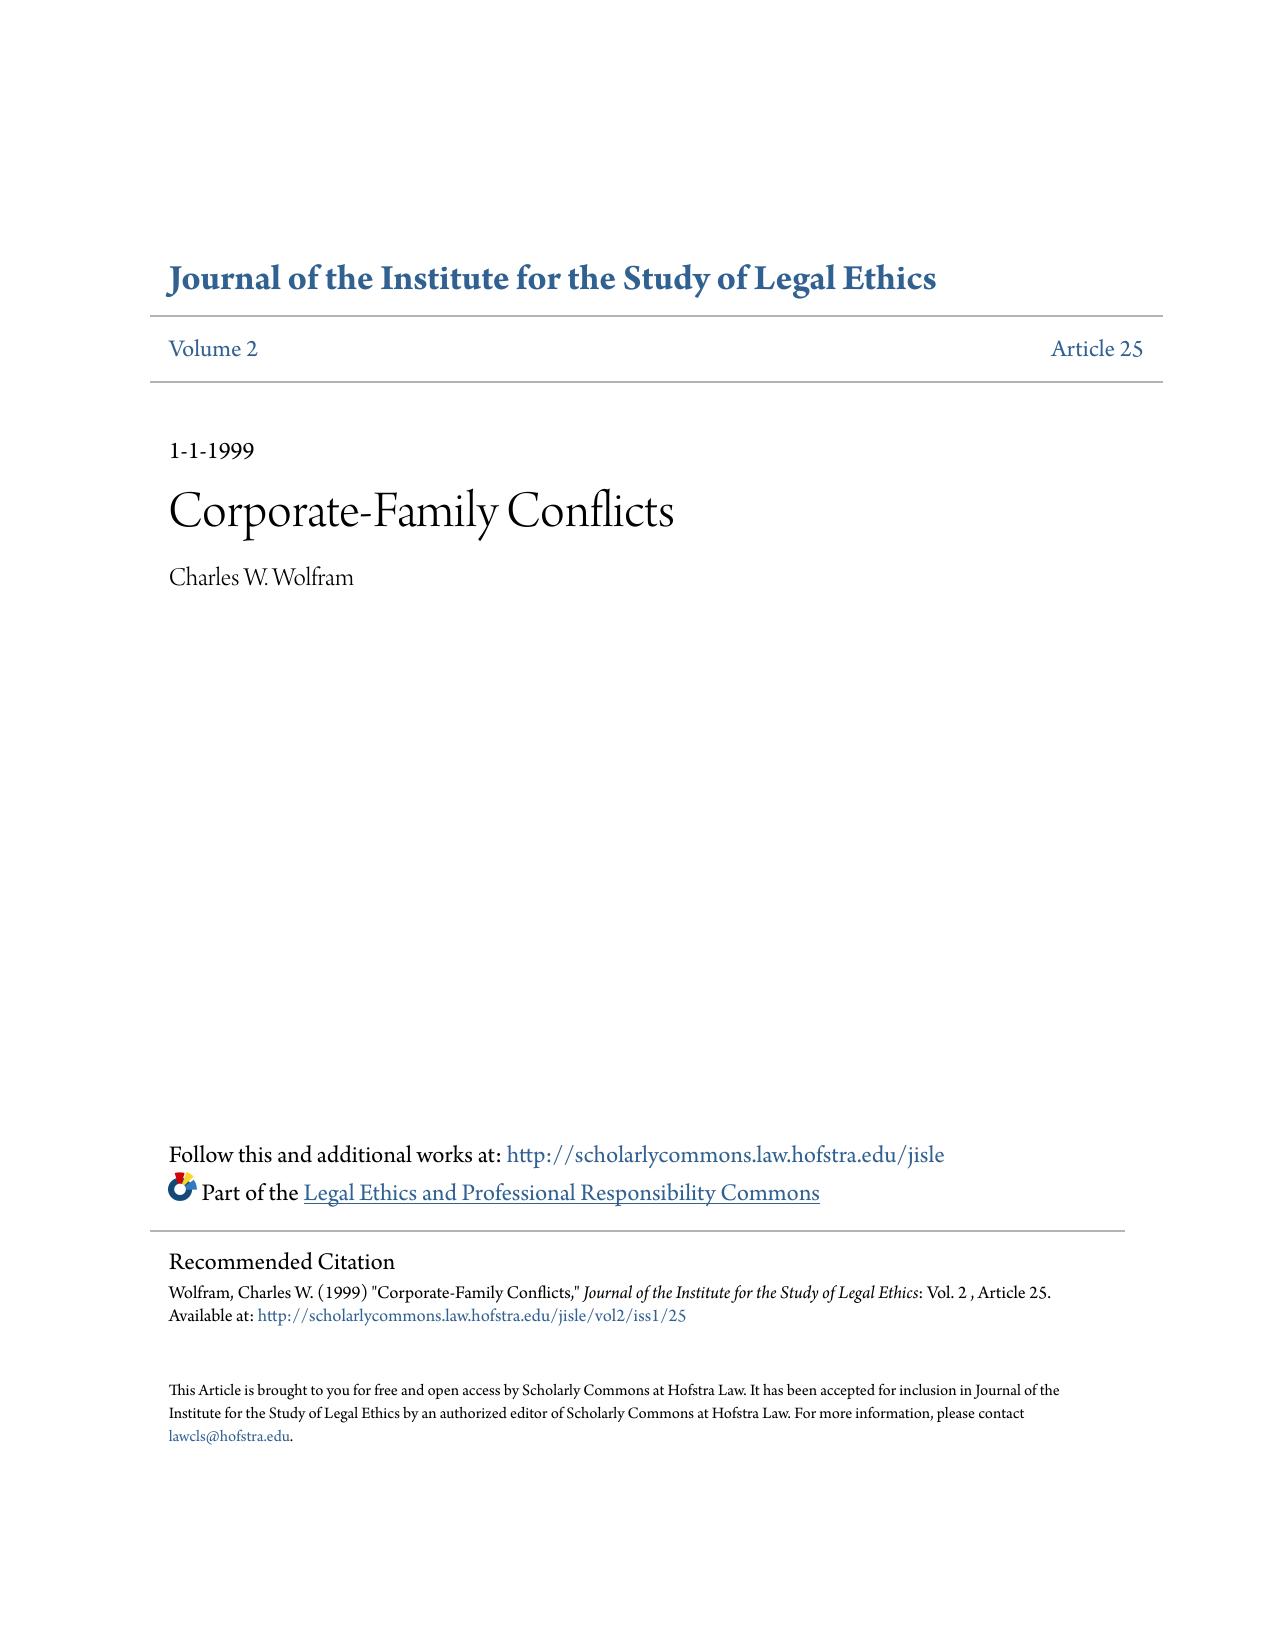 Corporate-Family Conflicts